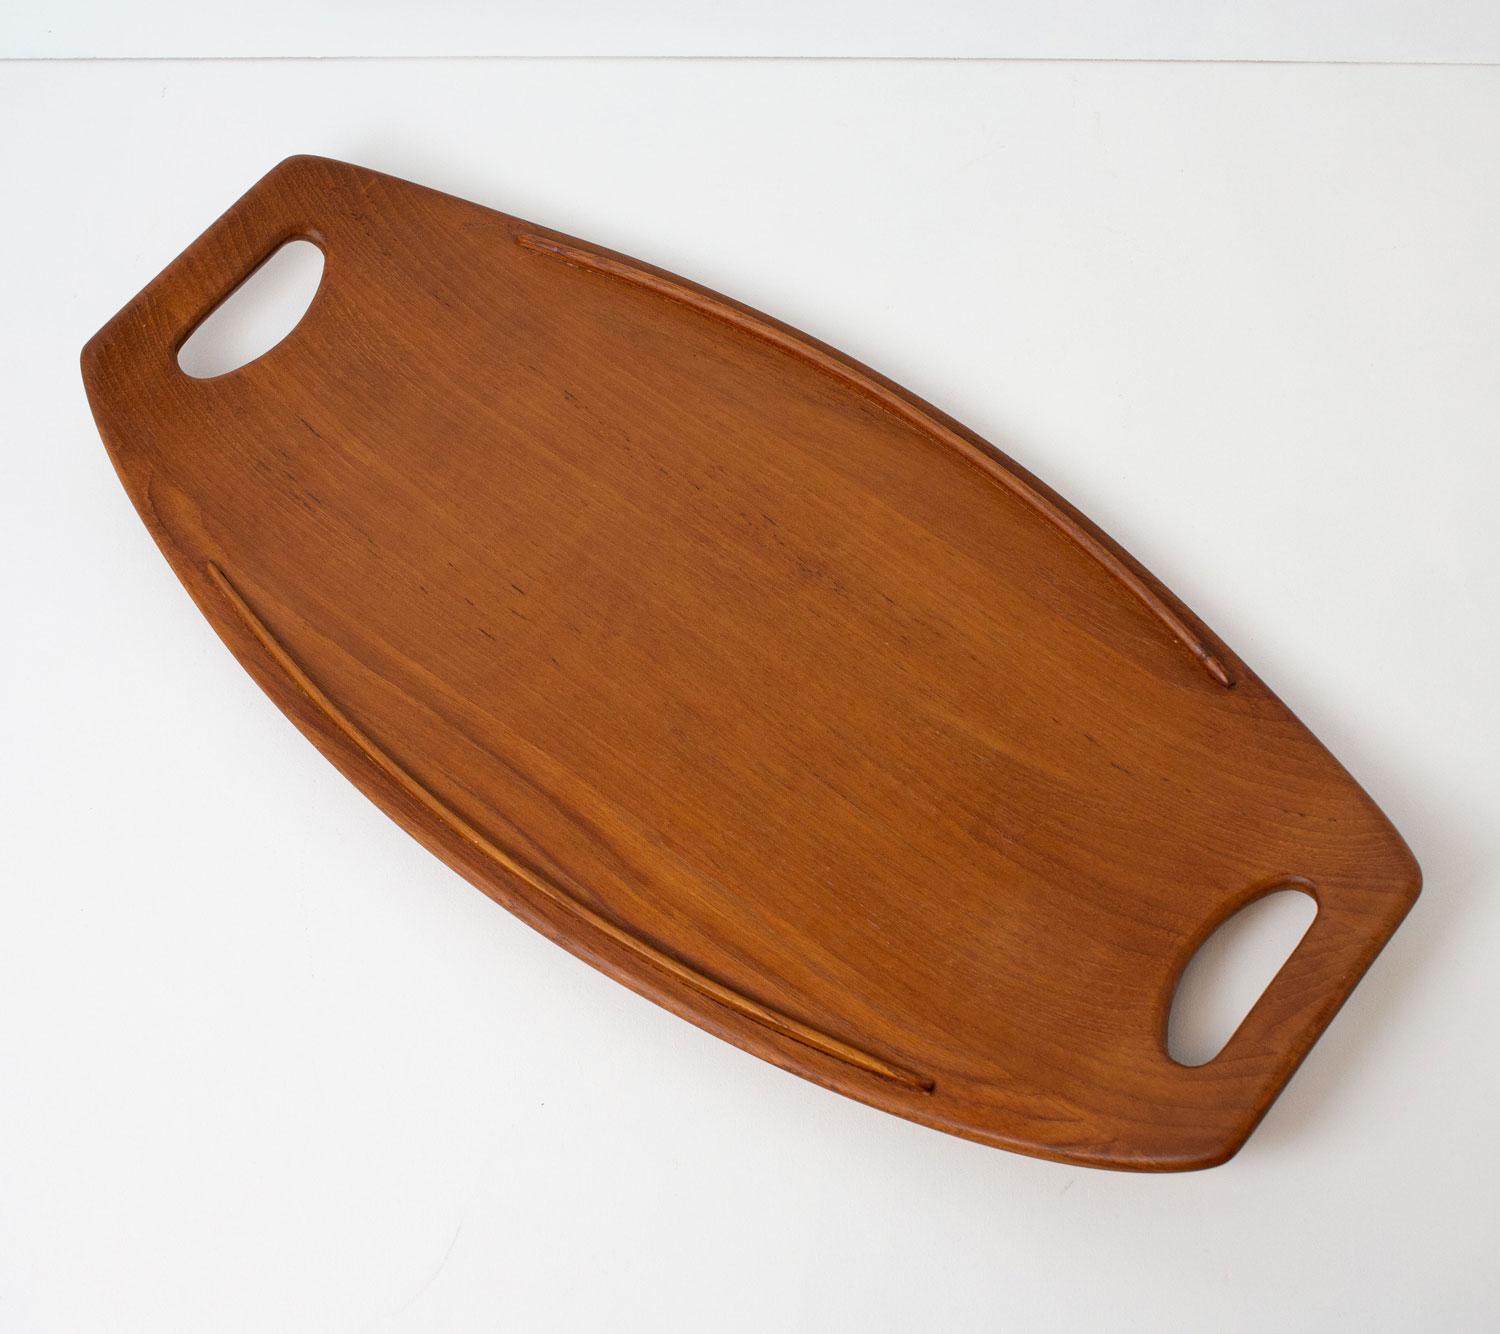 Danish Teak Tray by Jens Quistgaard for Dansk, 1950s In Good Condition For Sale In Southampton, GB